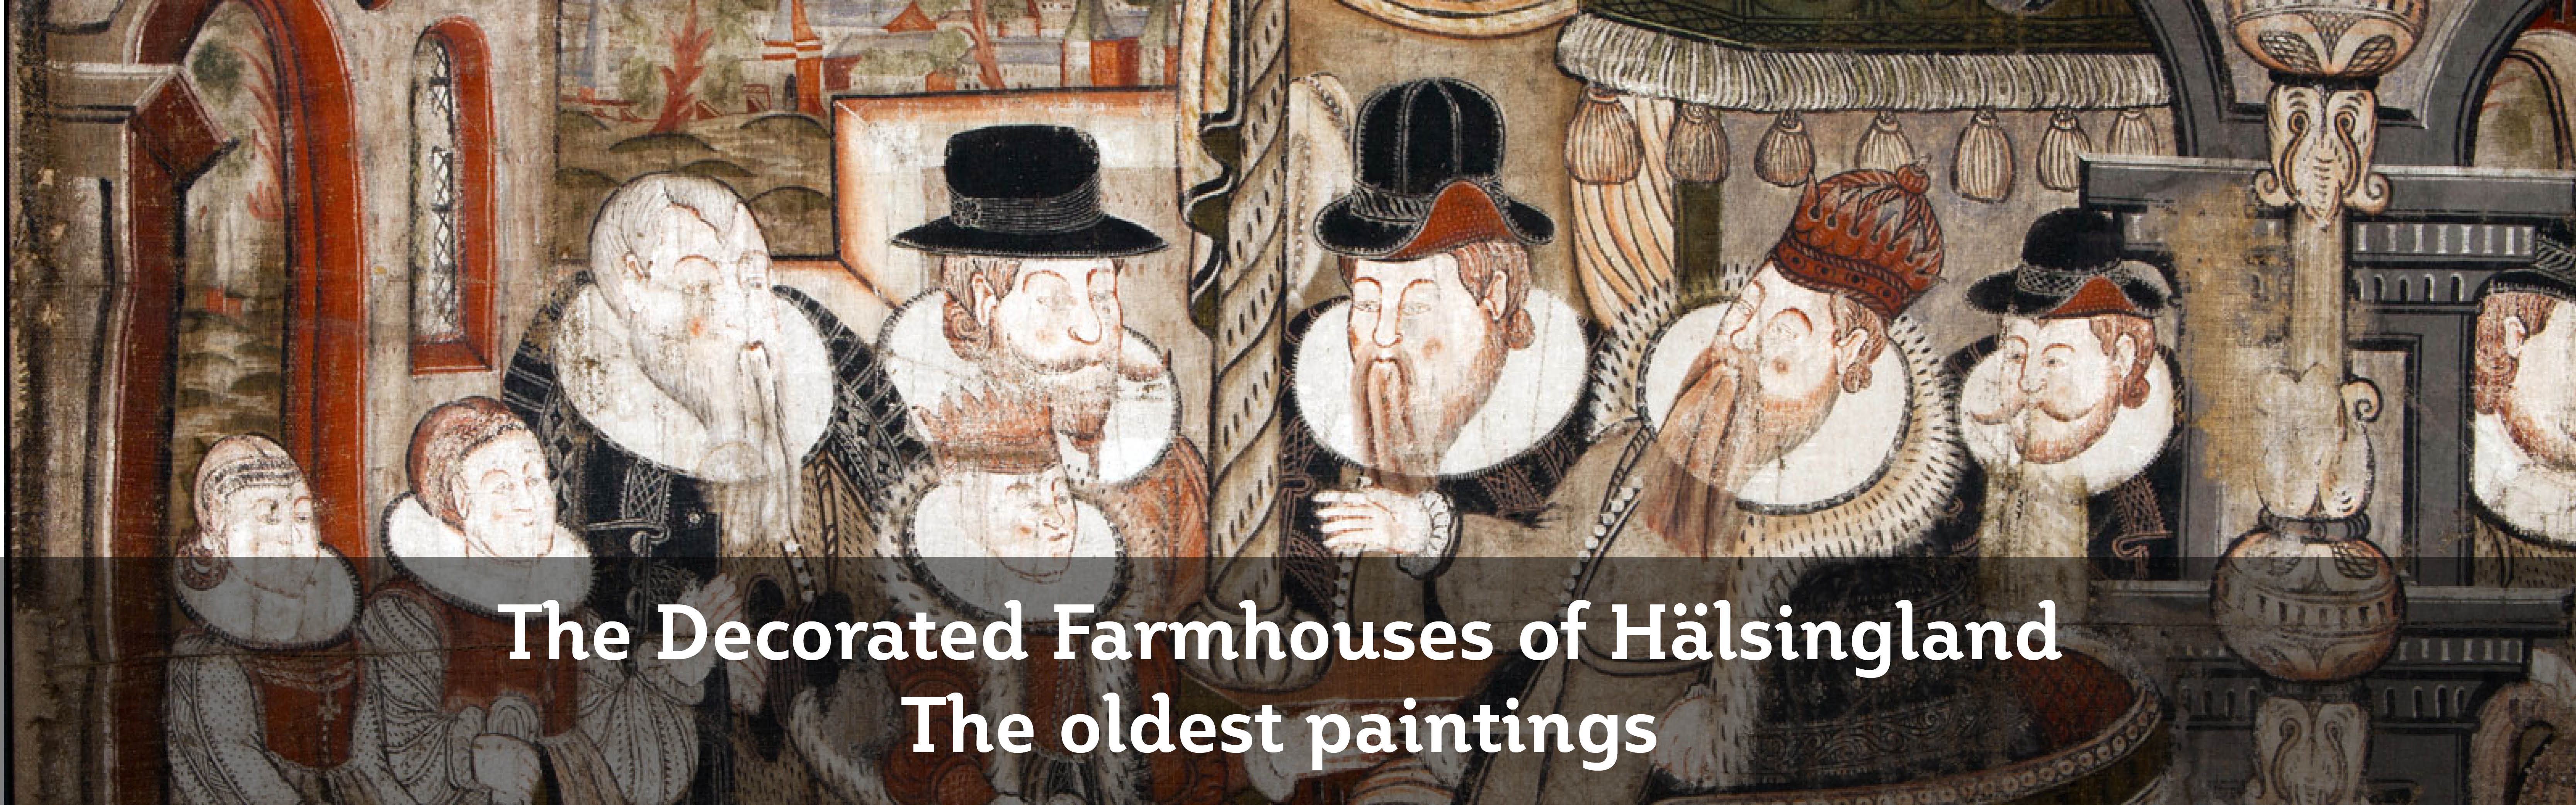 The oldest paintings